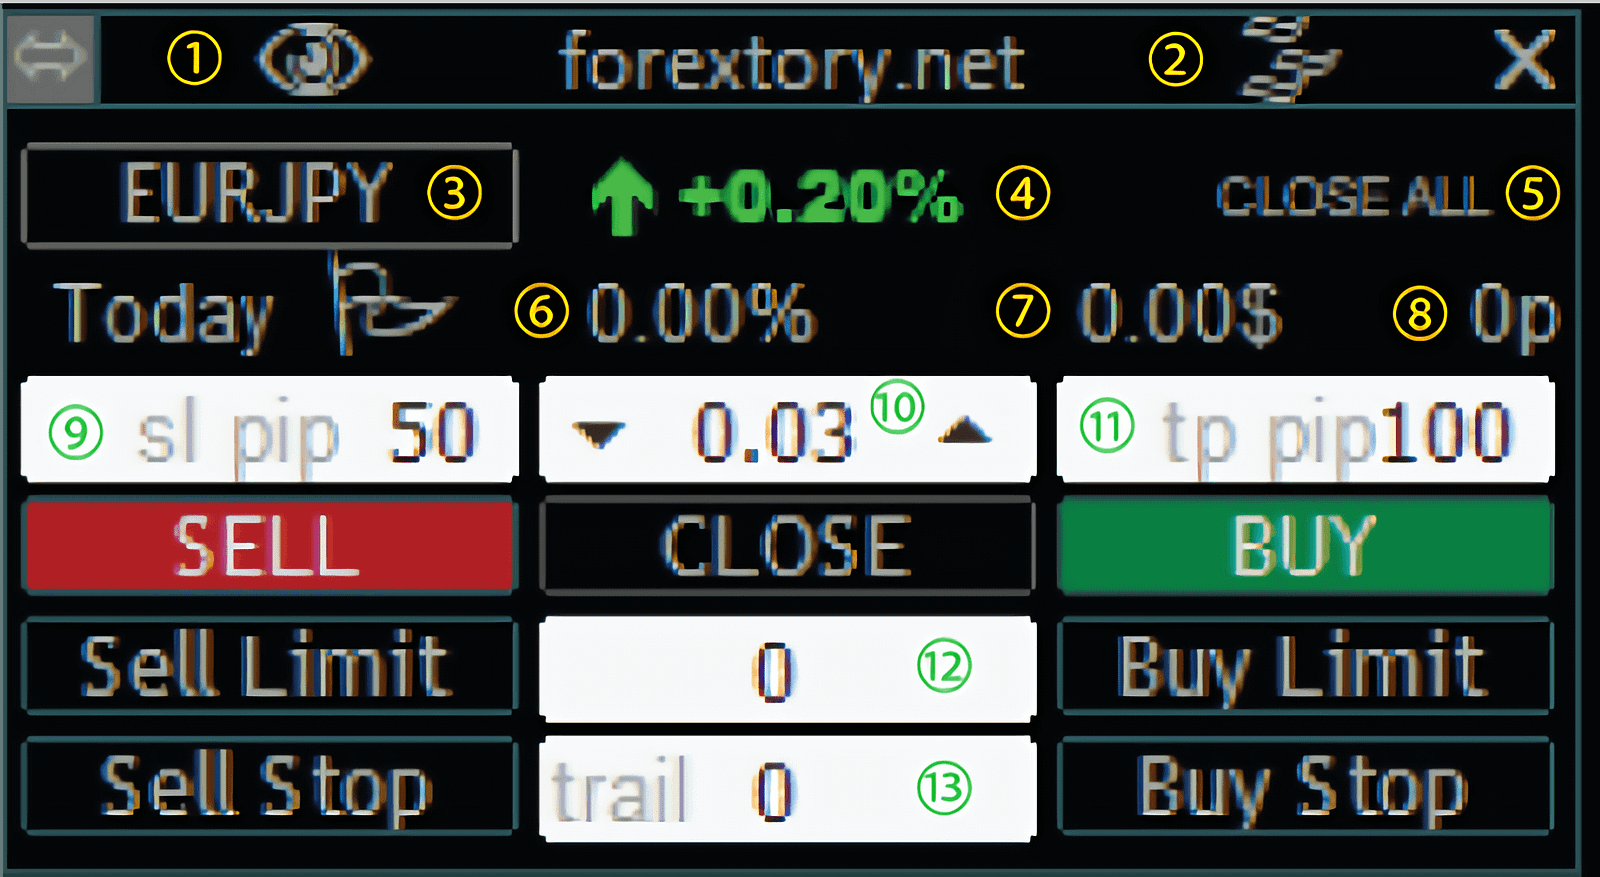 Sharing Free Forextory Trading Tool Best Forex Trading Simulator 2019 - 